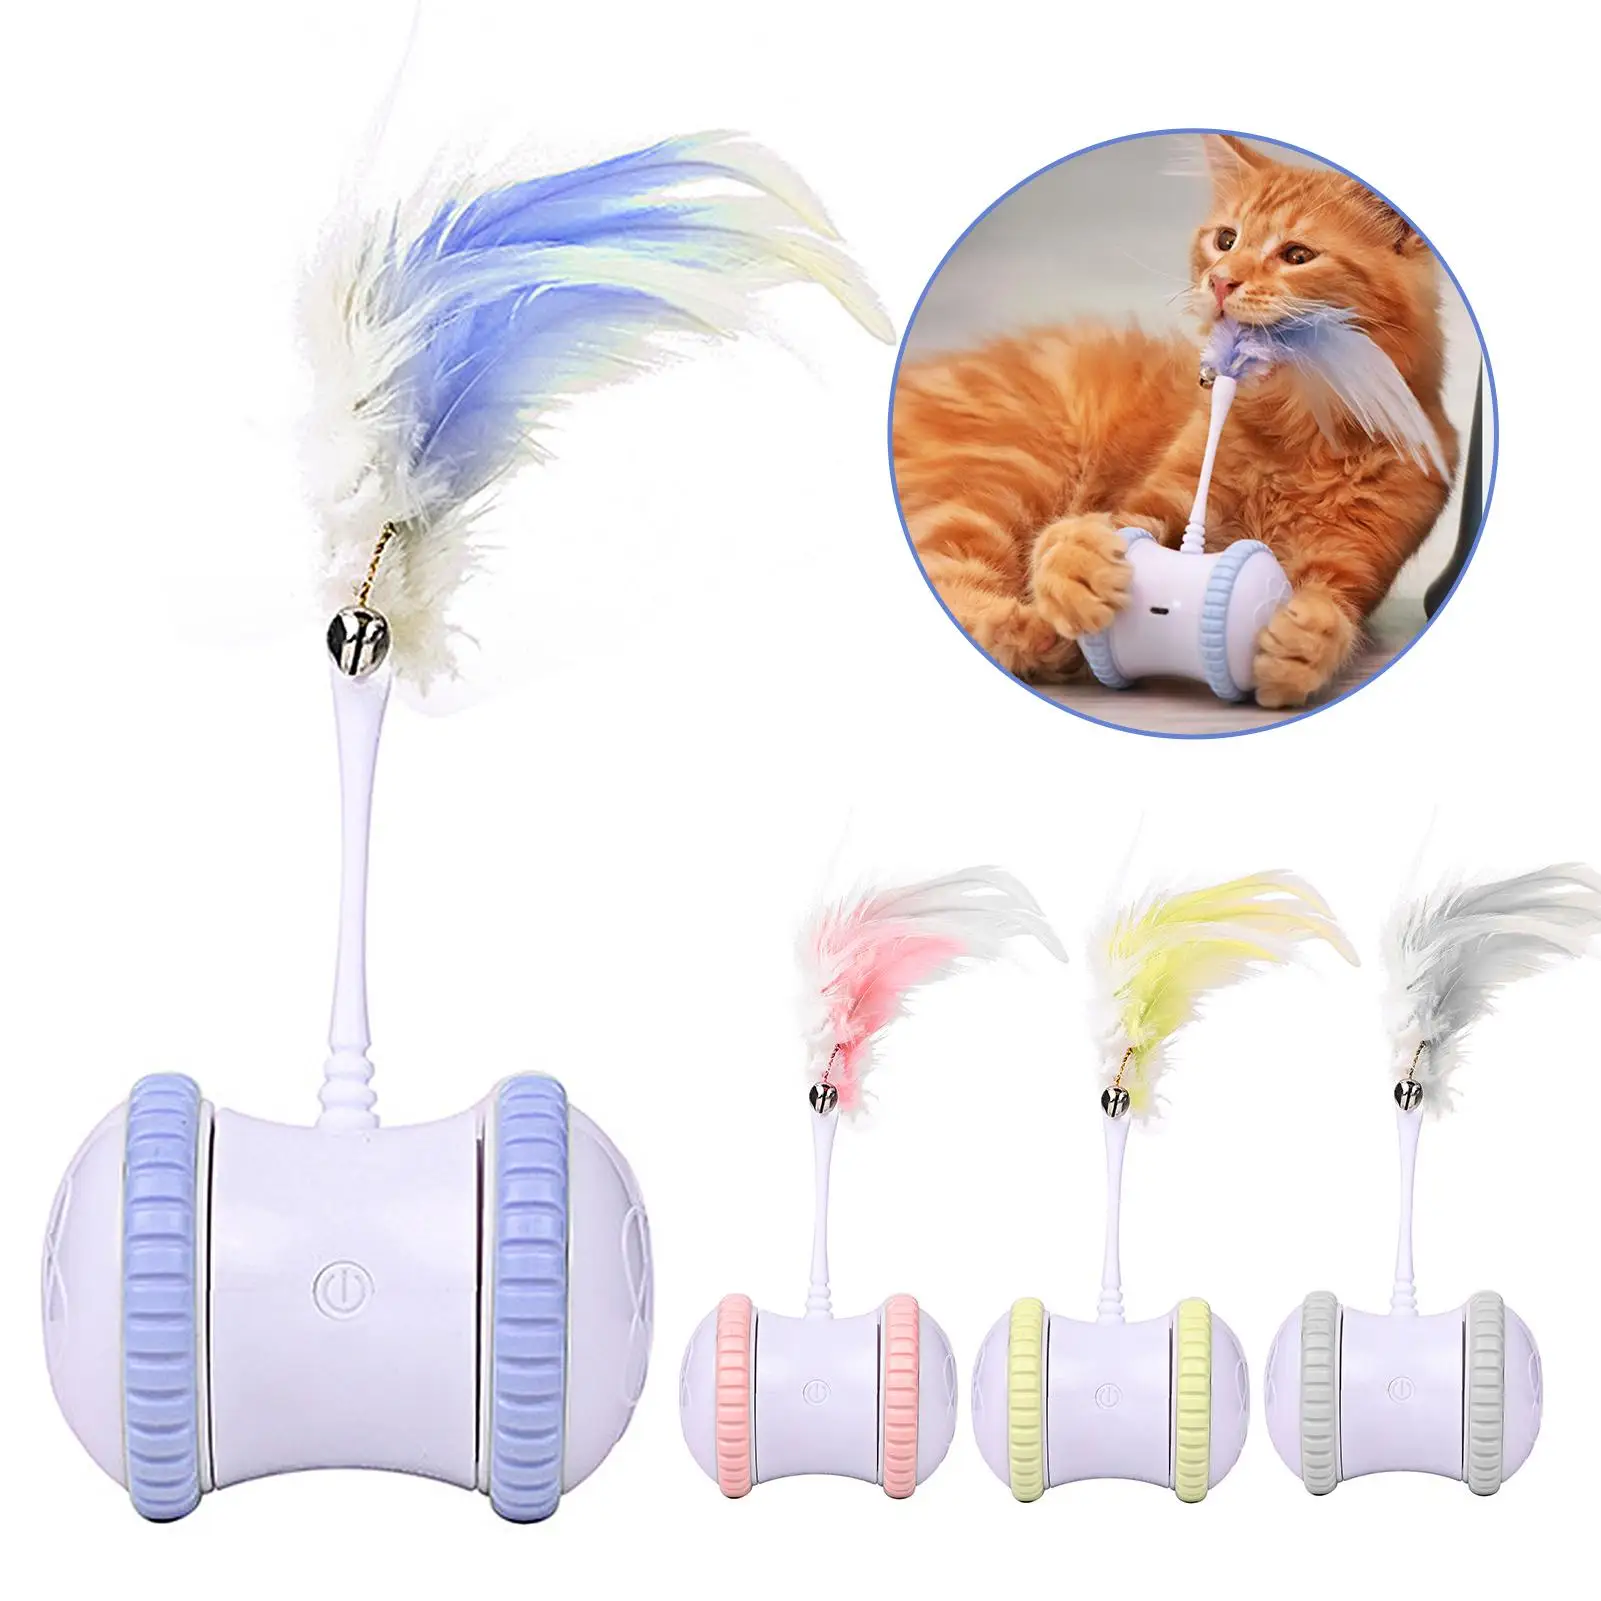 

Indoor Interactive Robotic 360 Degree Rotation USB Rechargeable Electronic Ball Cat Toy with LED Light Feather for Pets Kitten